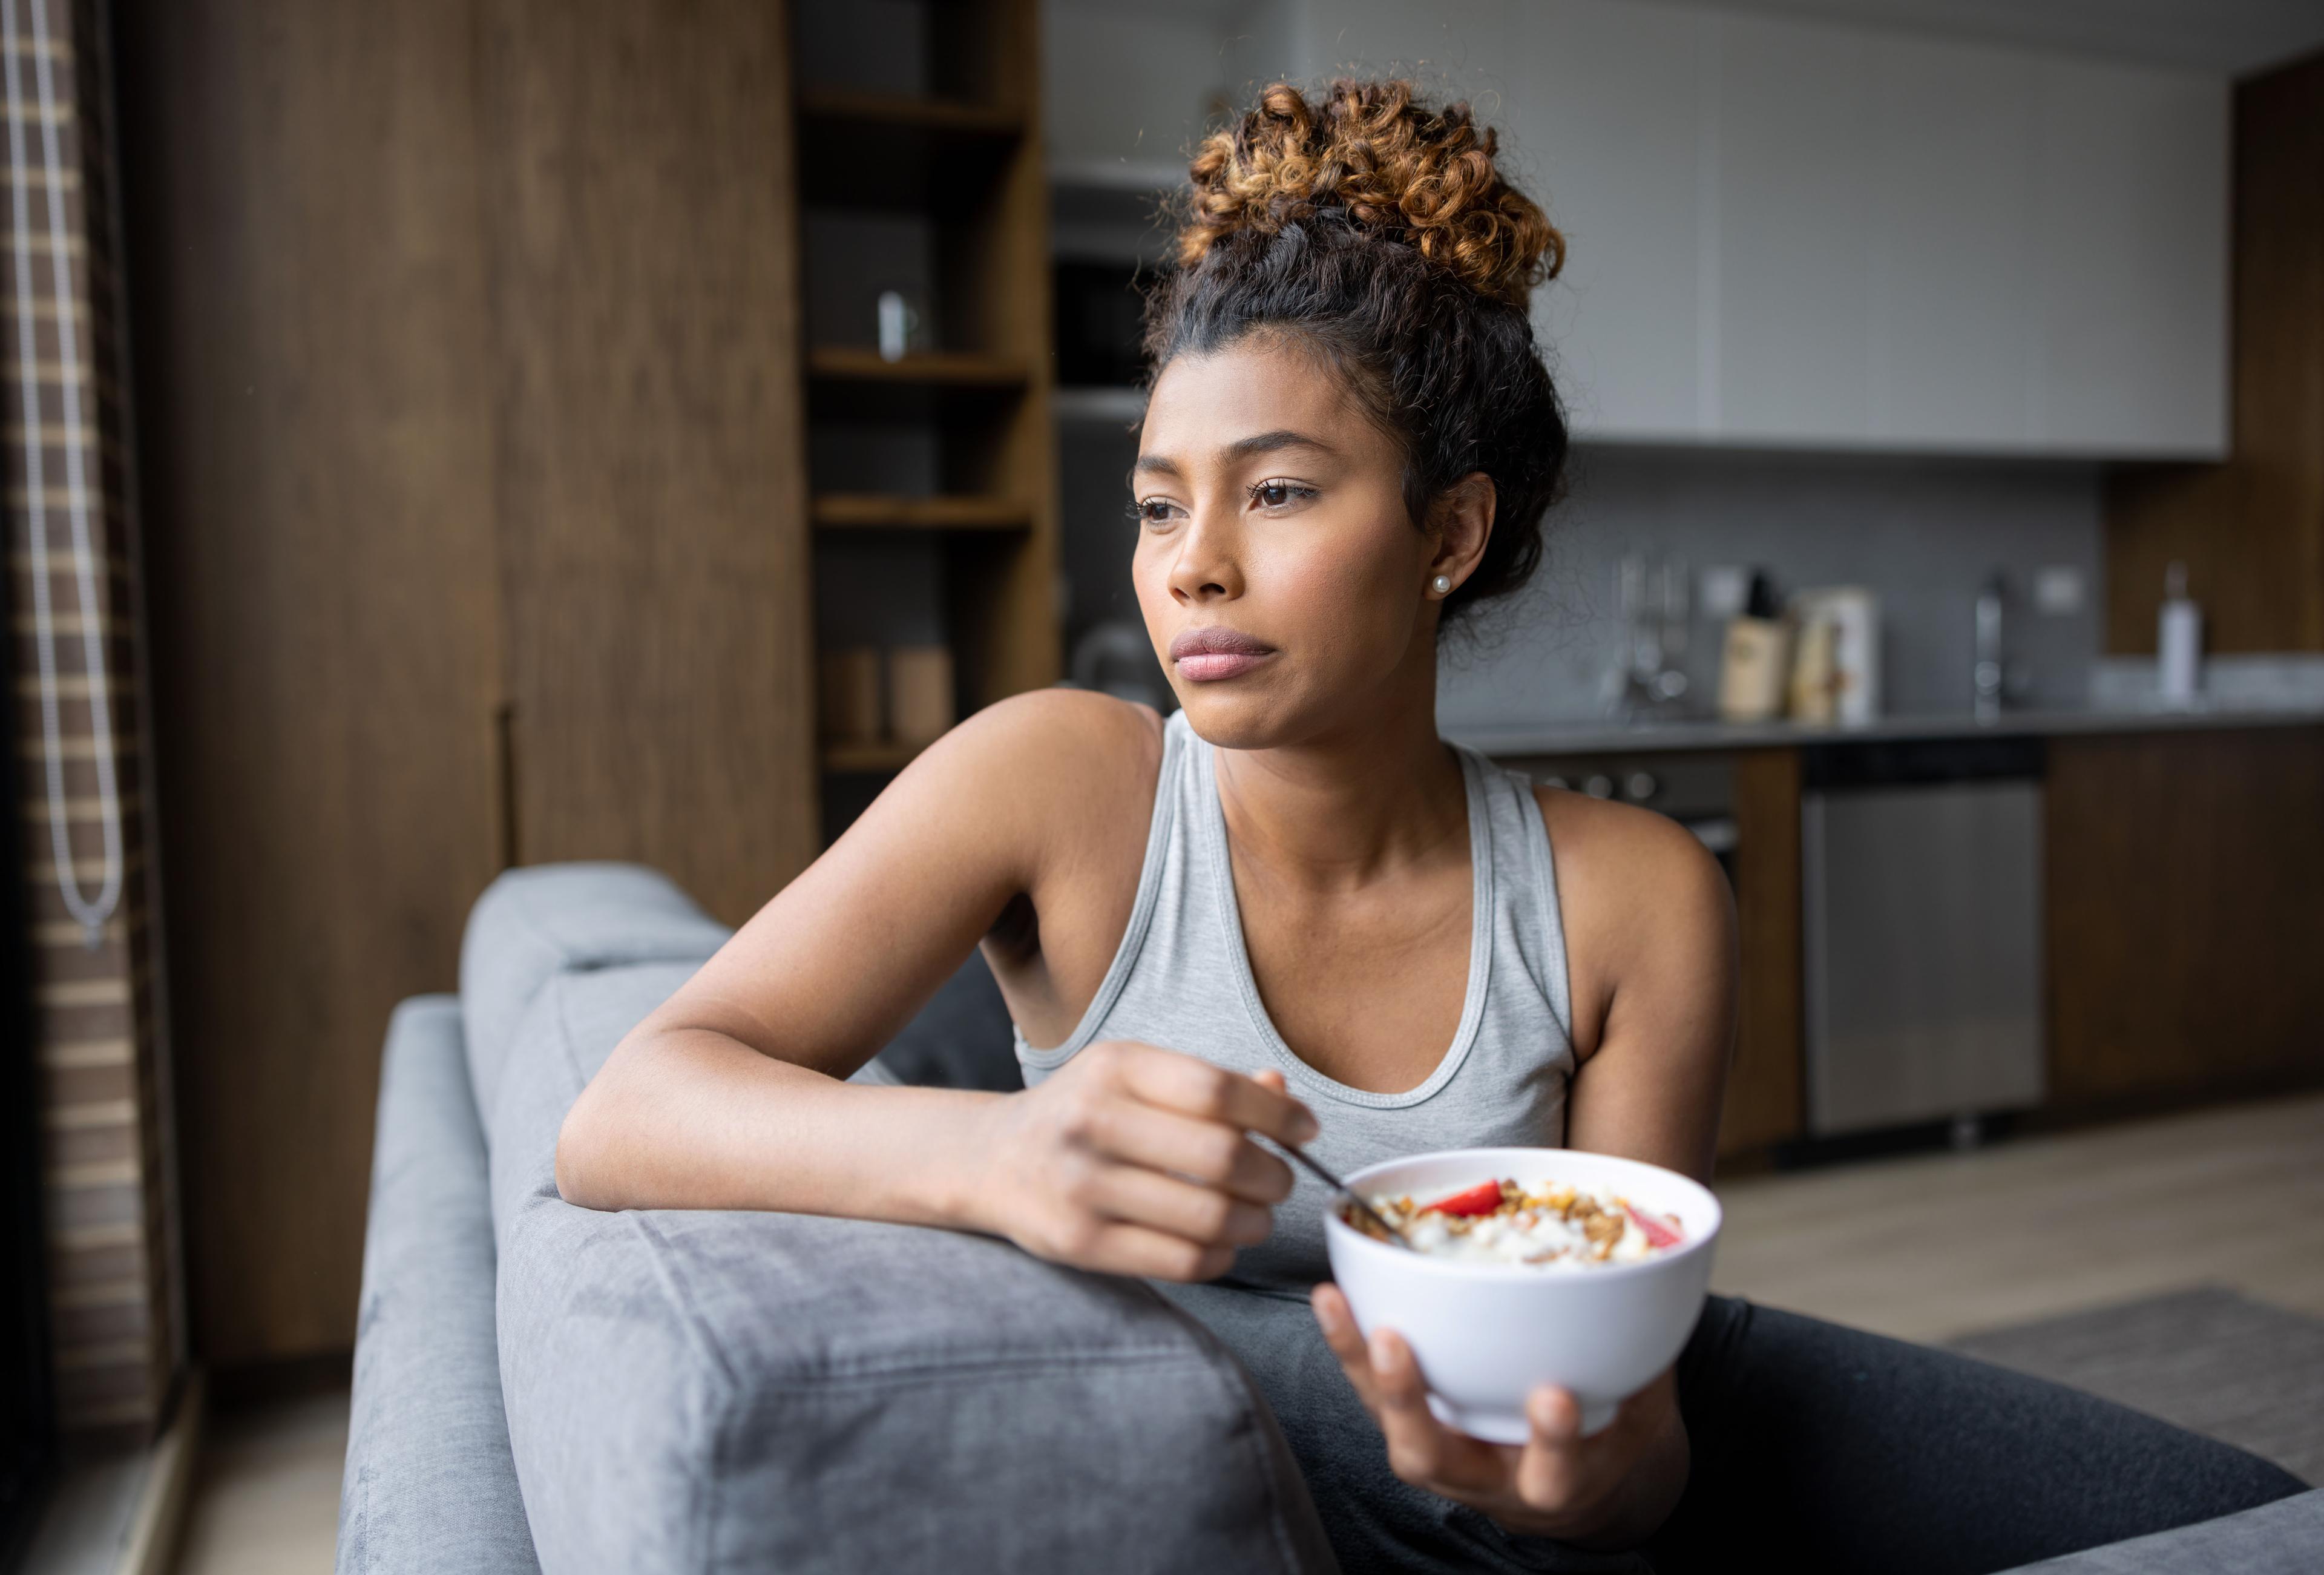 A woman in a tank top sits on a couch, holding a bowl of cereal, looking sadly into the distance